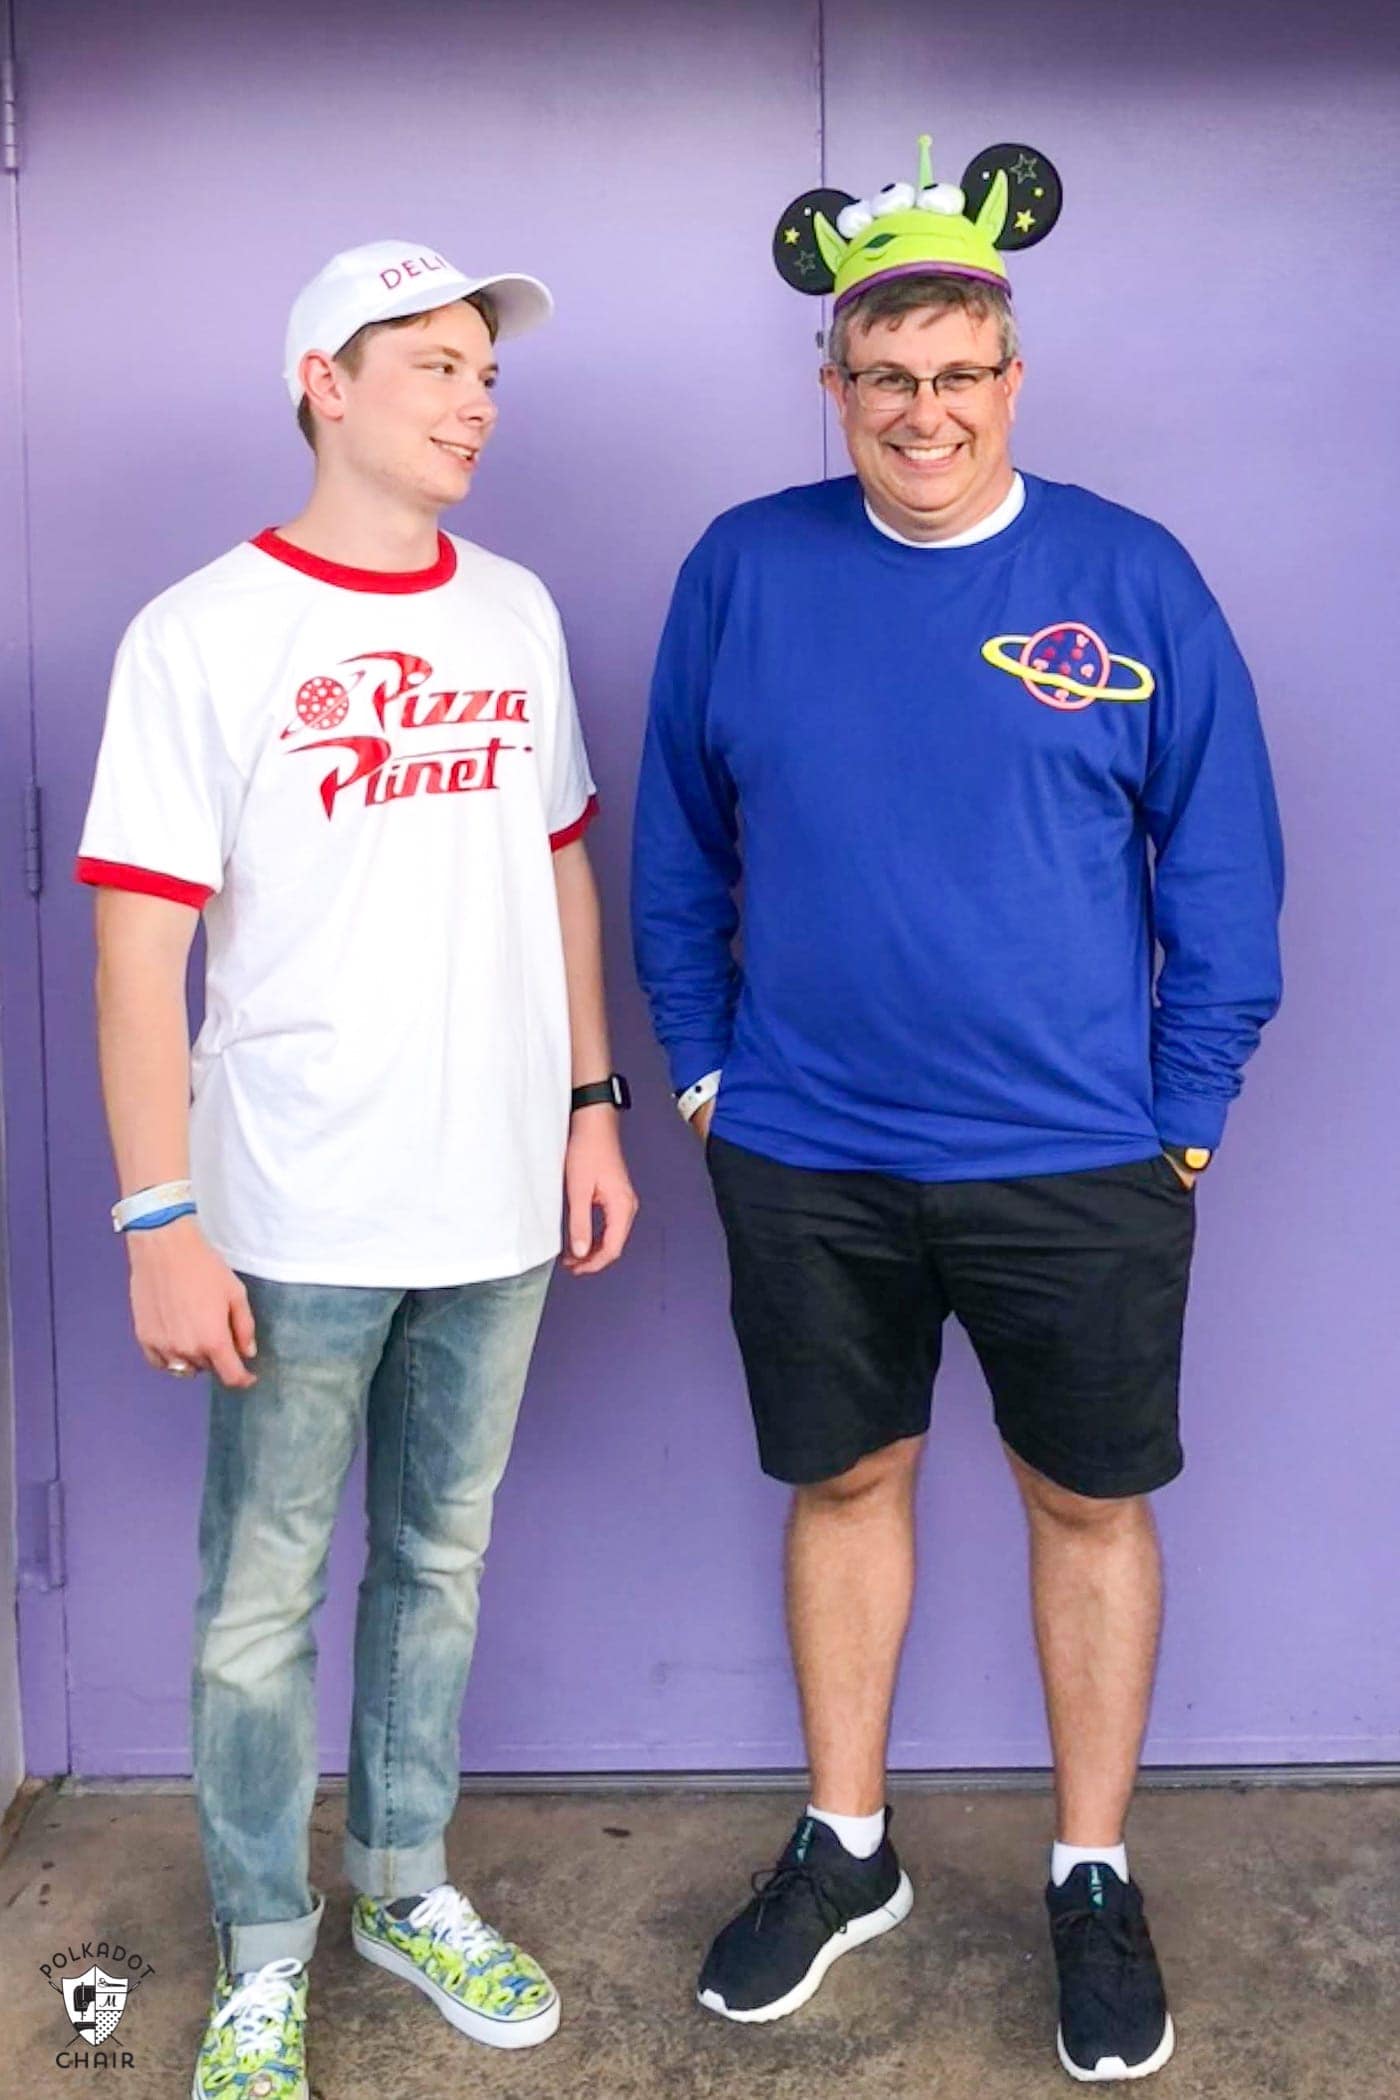 two men standing in front of a purple wall. One is in a white baseball cap and wearing a white tshirt with red lining the collar and sleeve with the Pizza Planet logo. The other is in a dark blue long sleeve tshirt with a pizza surrounded by a ring in the top corner. and has on a green alien mickey hat. 